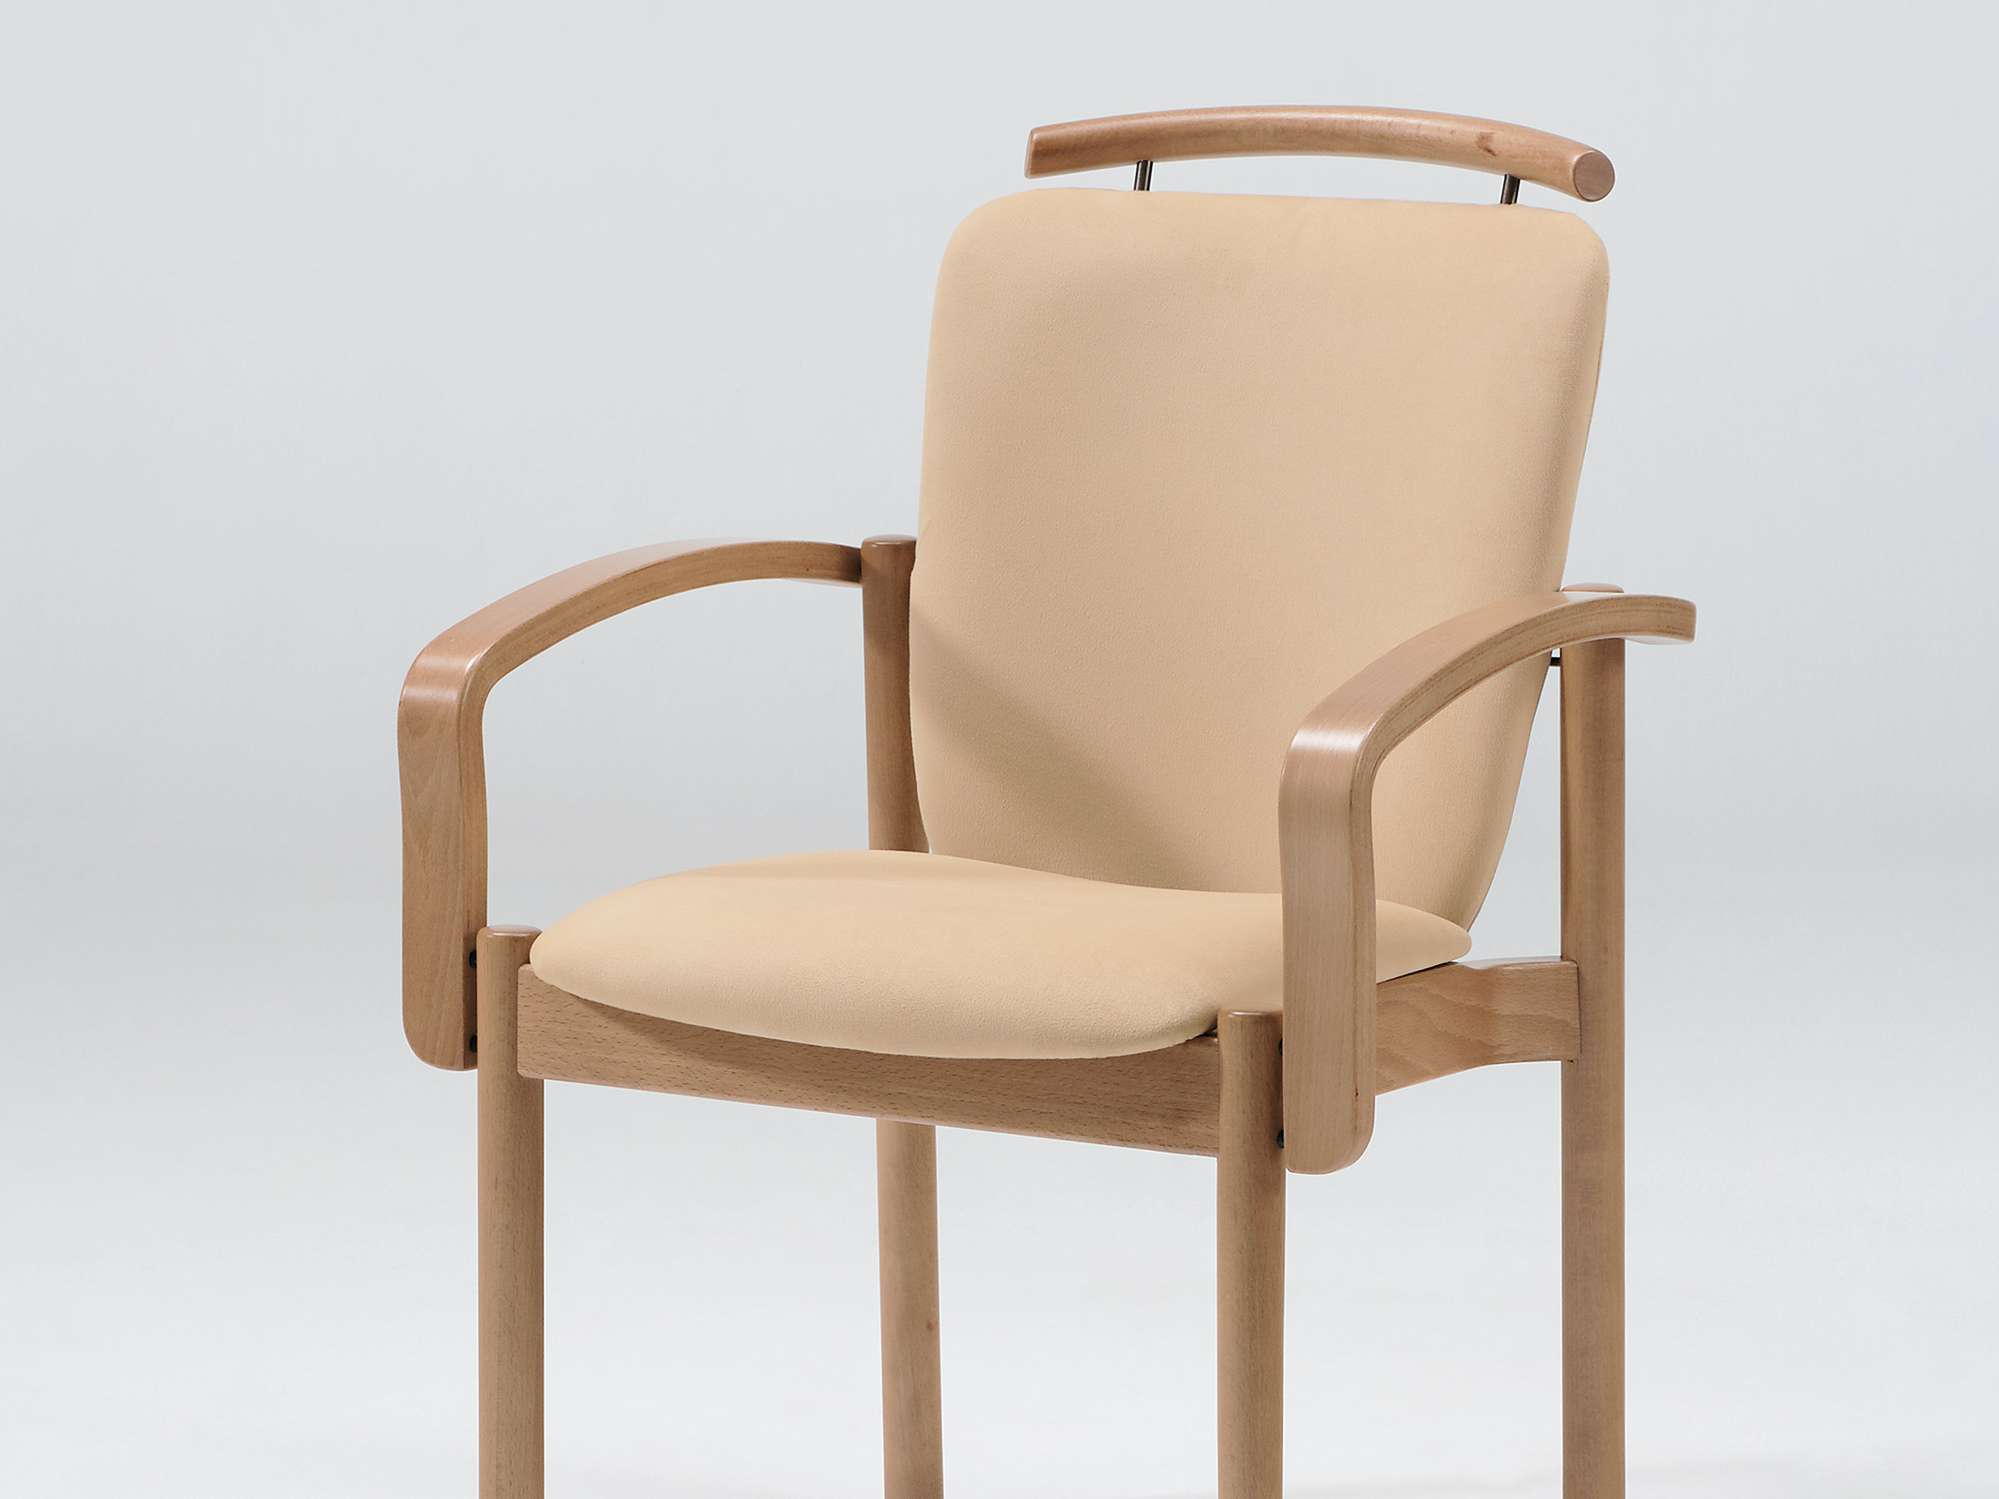 The Optimo model as a stacking armchair with handle